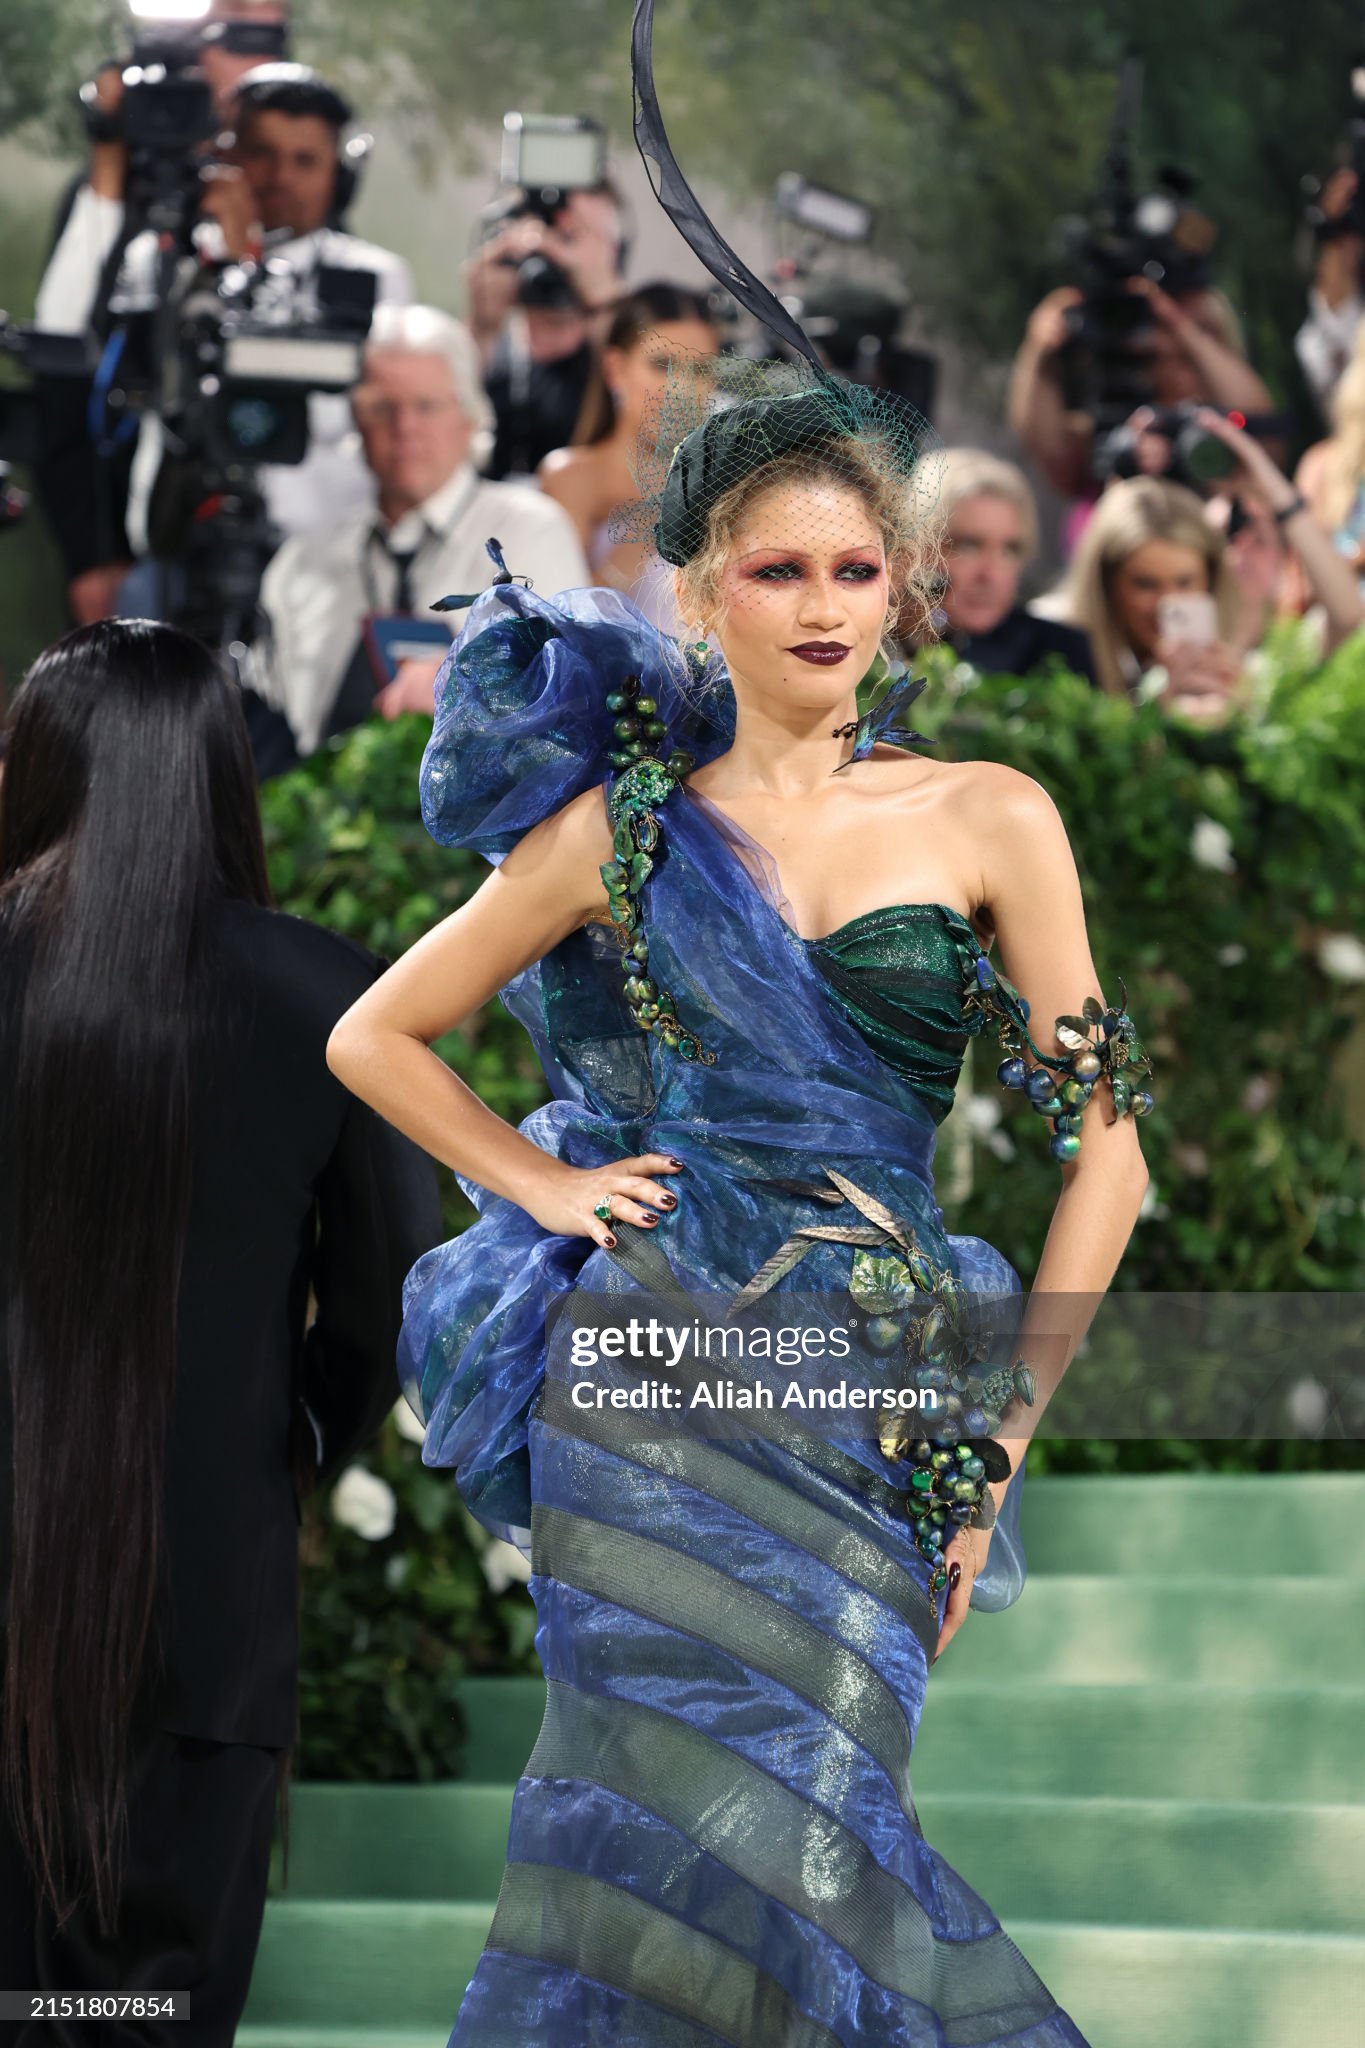 gettyimages-2151807854-2048x2048.jpg